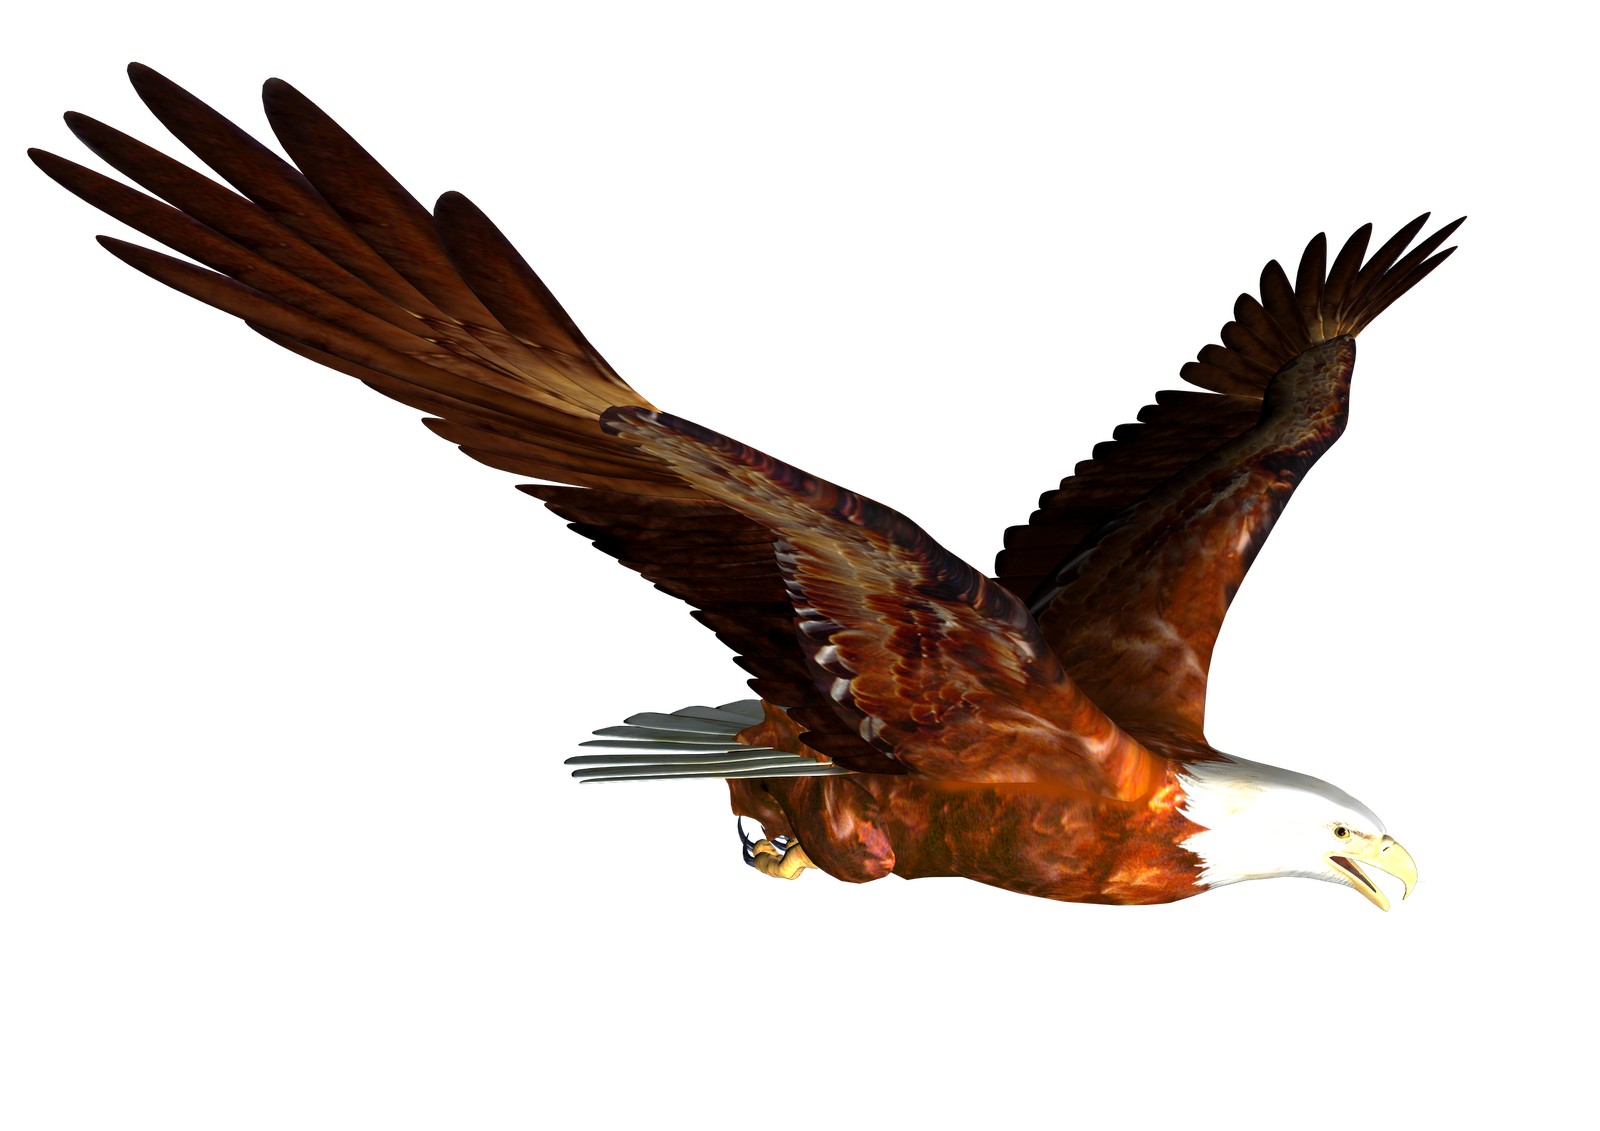 flying eagle clip art free download - photo #24